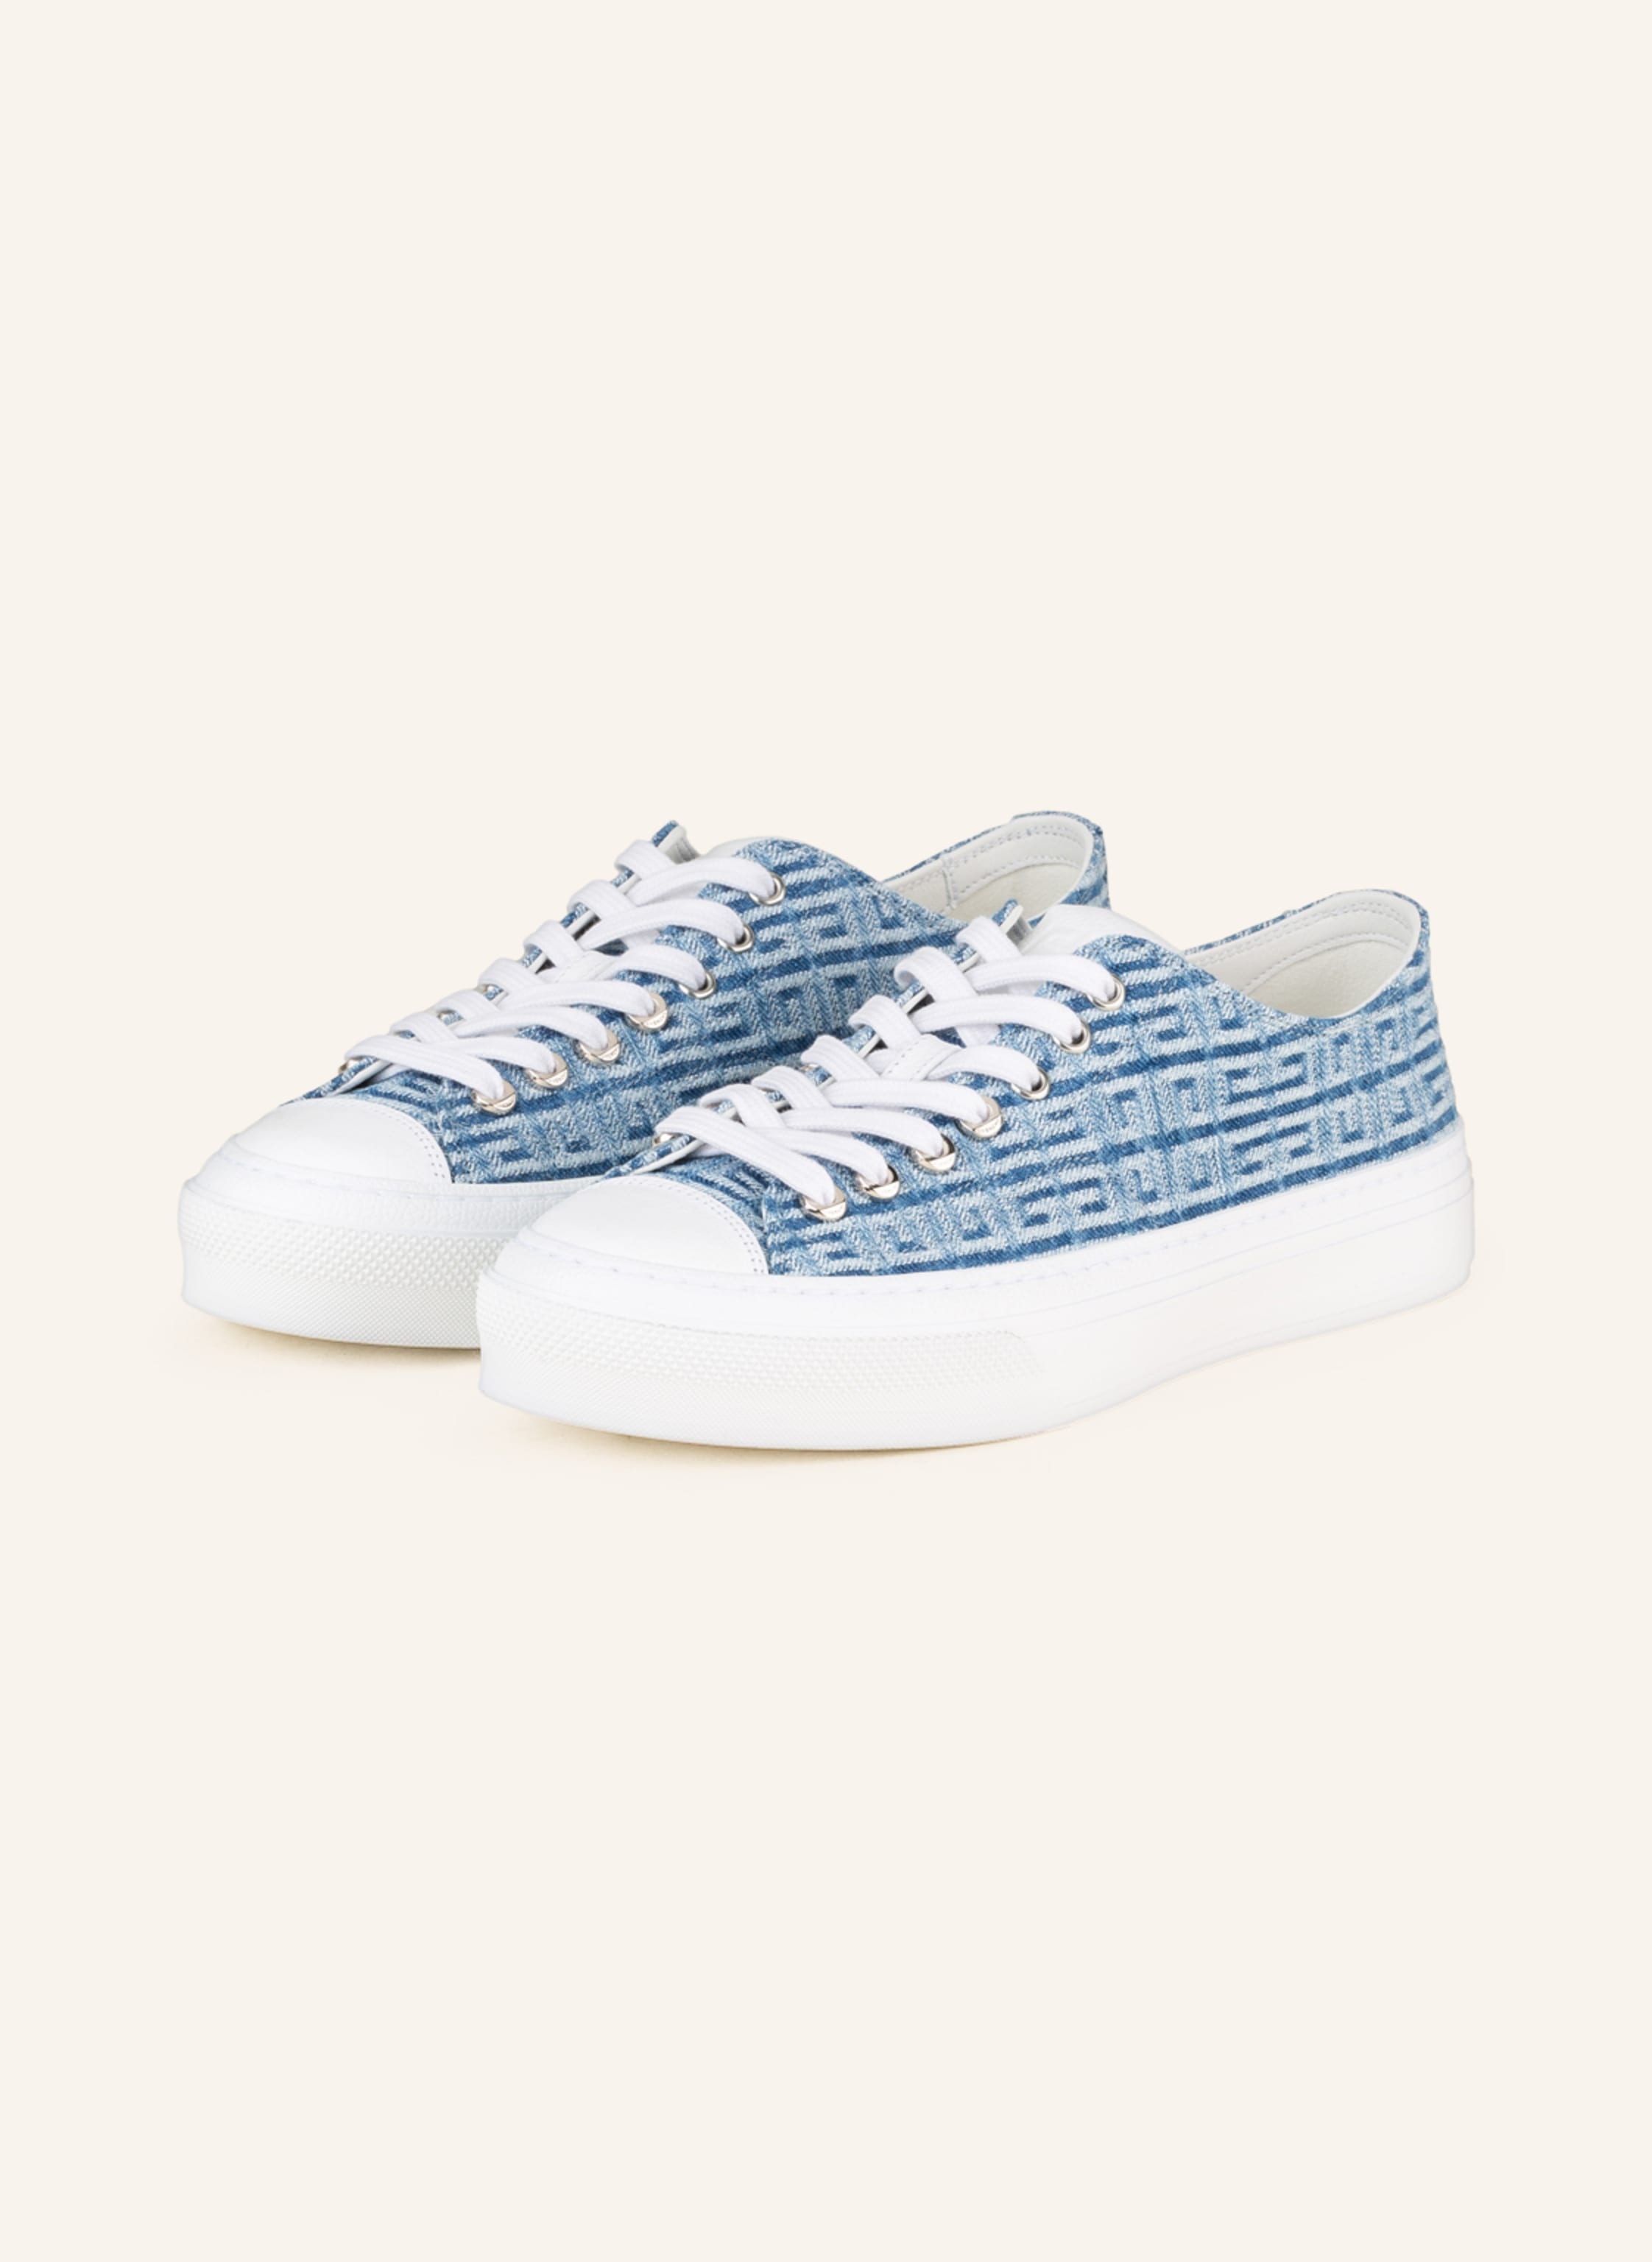 GIVENCHY Sneakers blue/ light blue